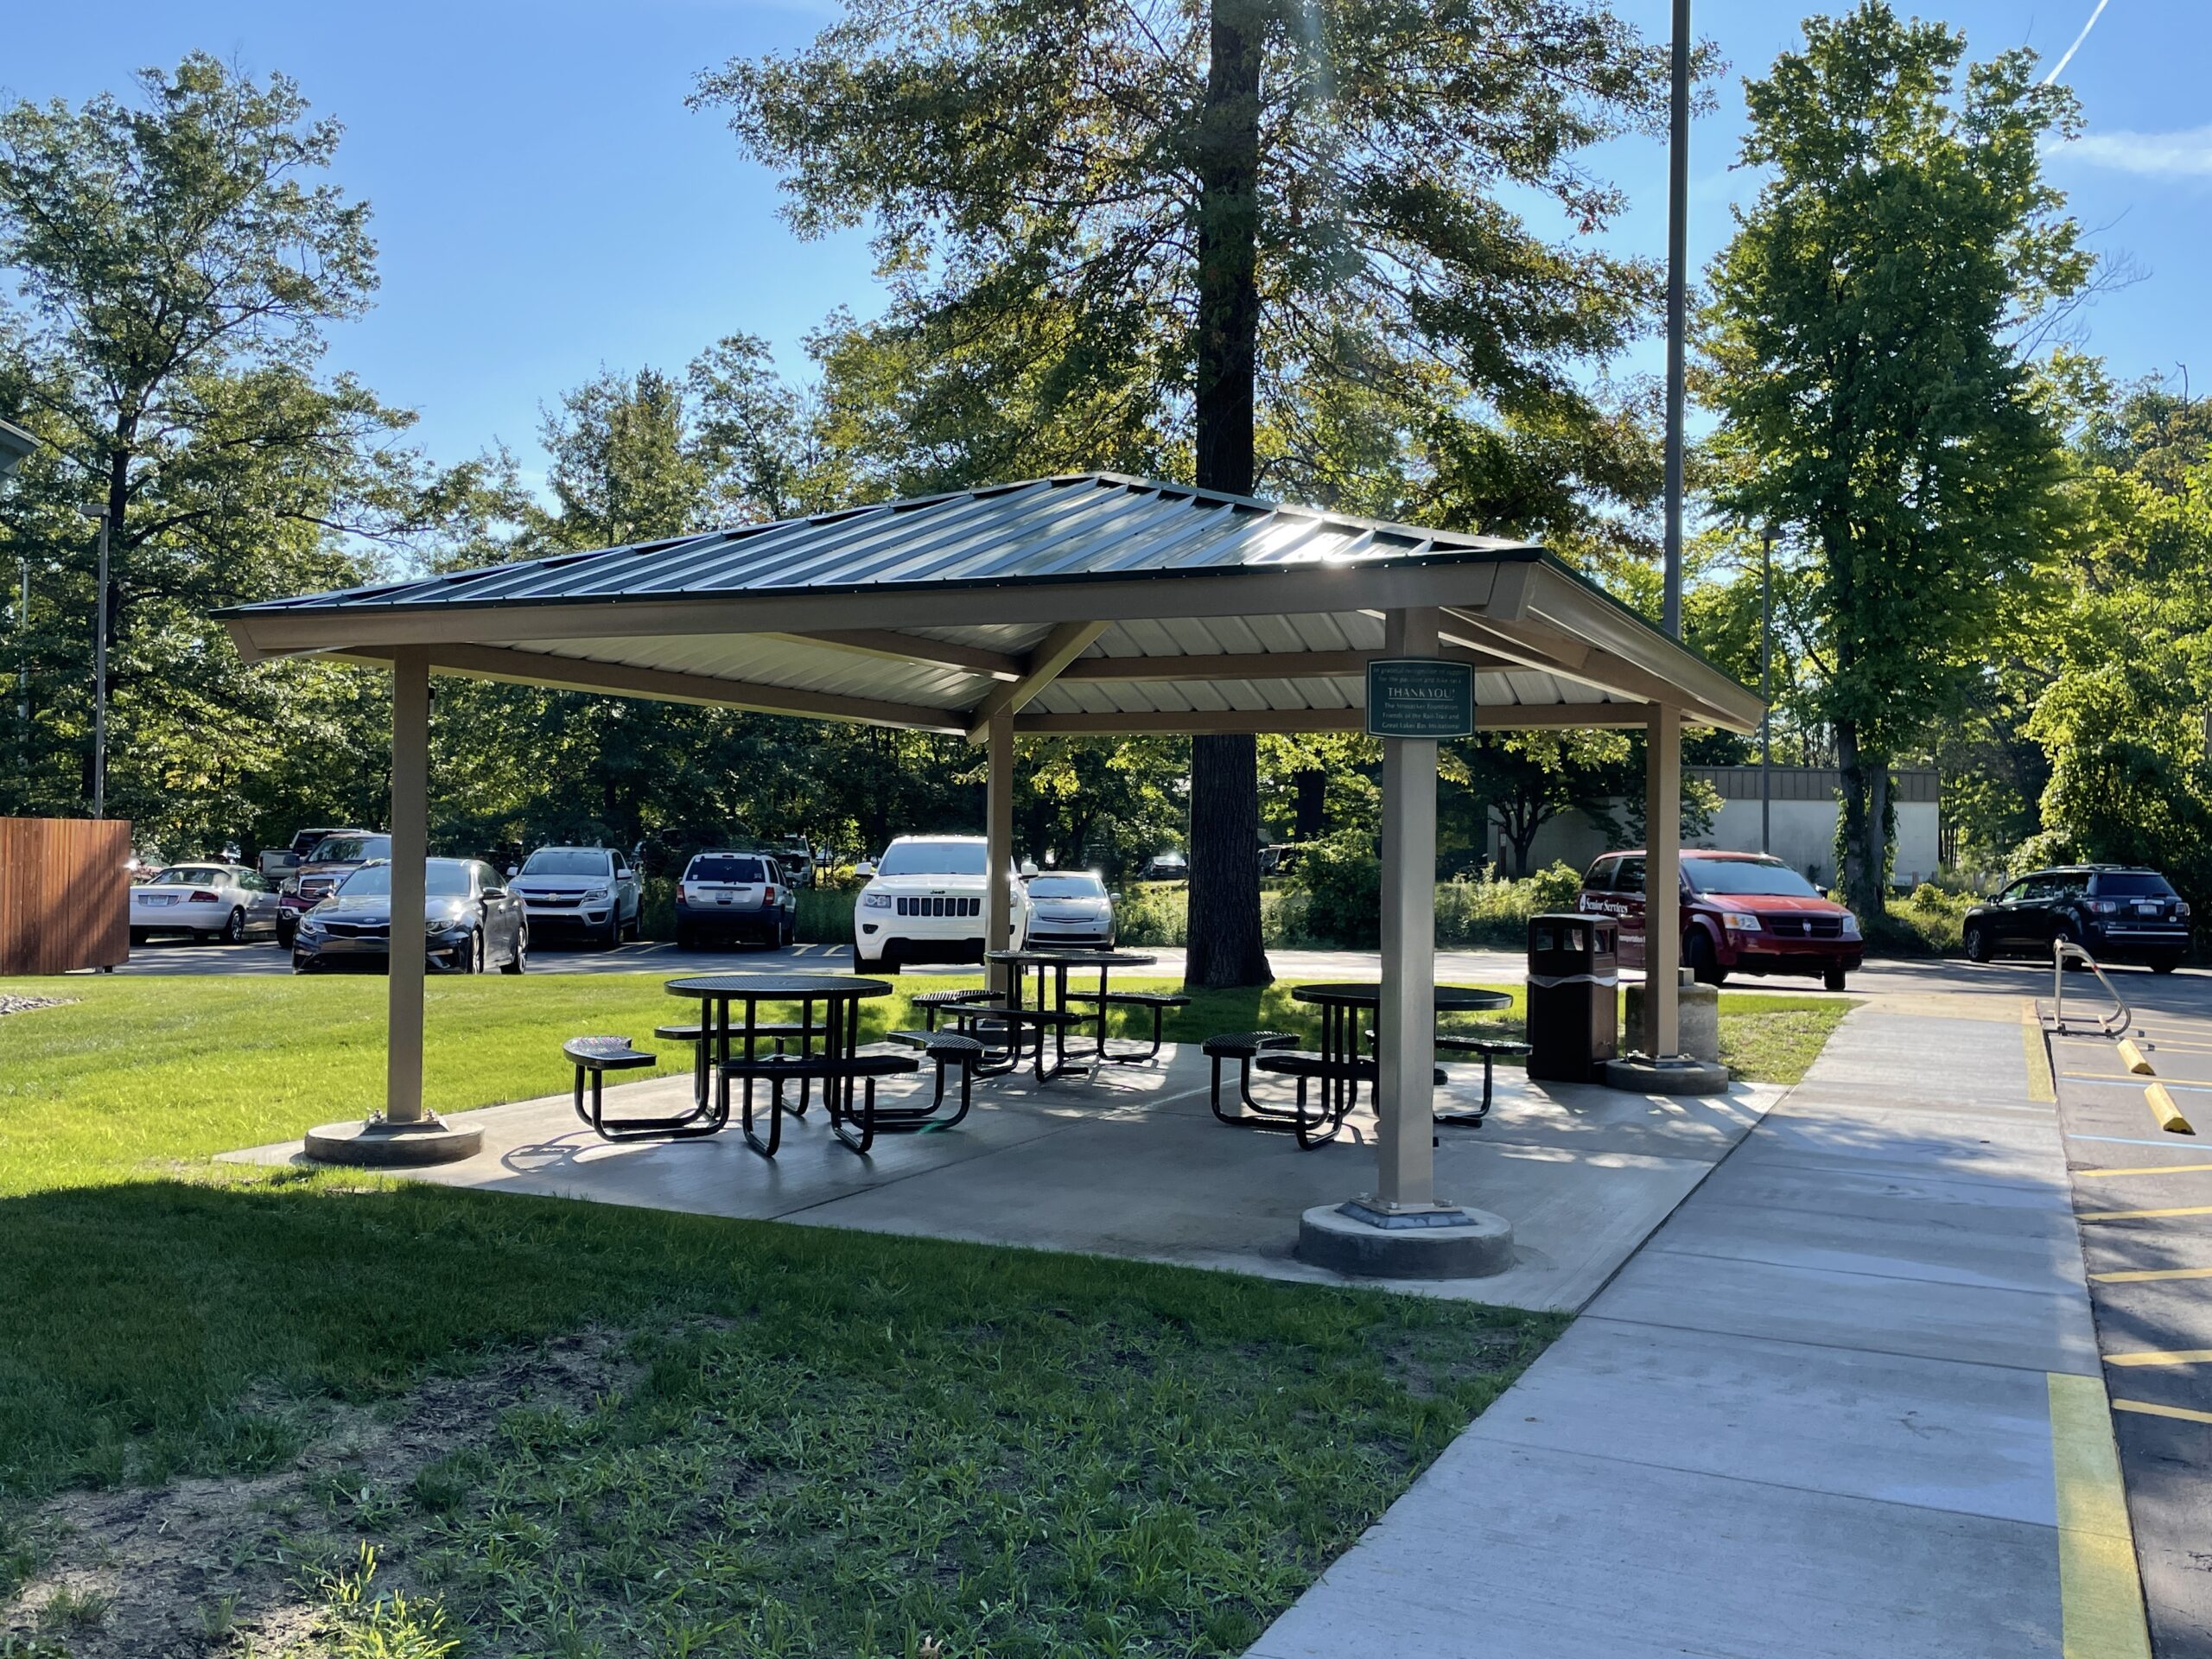 Thanks to funds from the Charles J. Strosacker Foundation, Friends of the Rail-Trail, and The Great Lakes Bay Invitational, an accessible pavilion is available at Trailside Center.